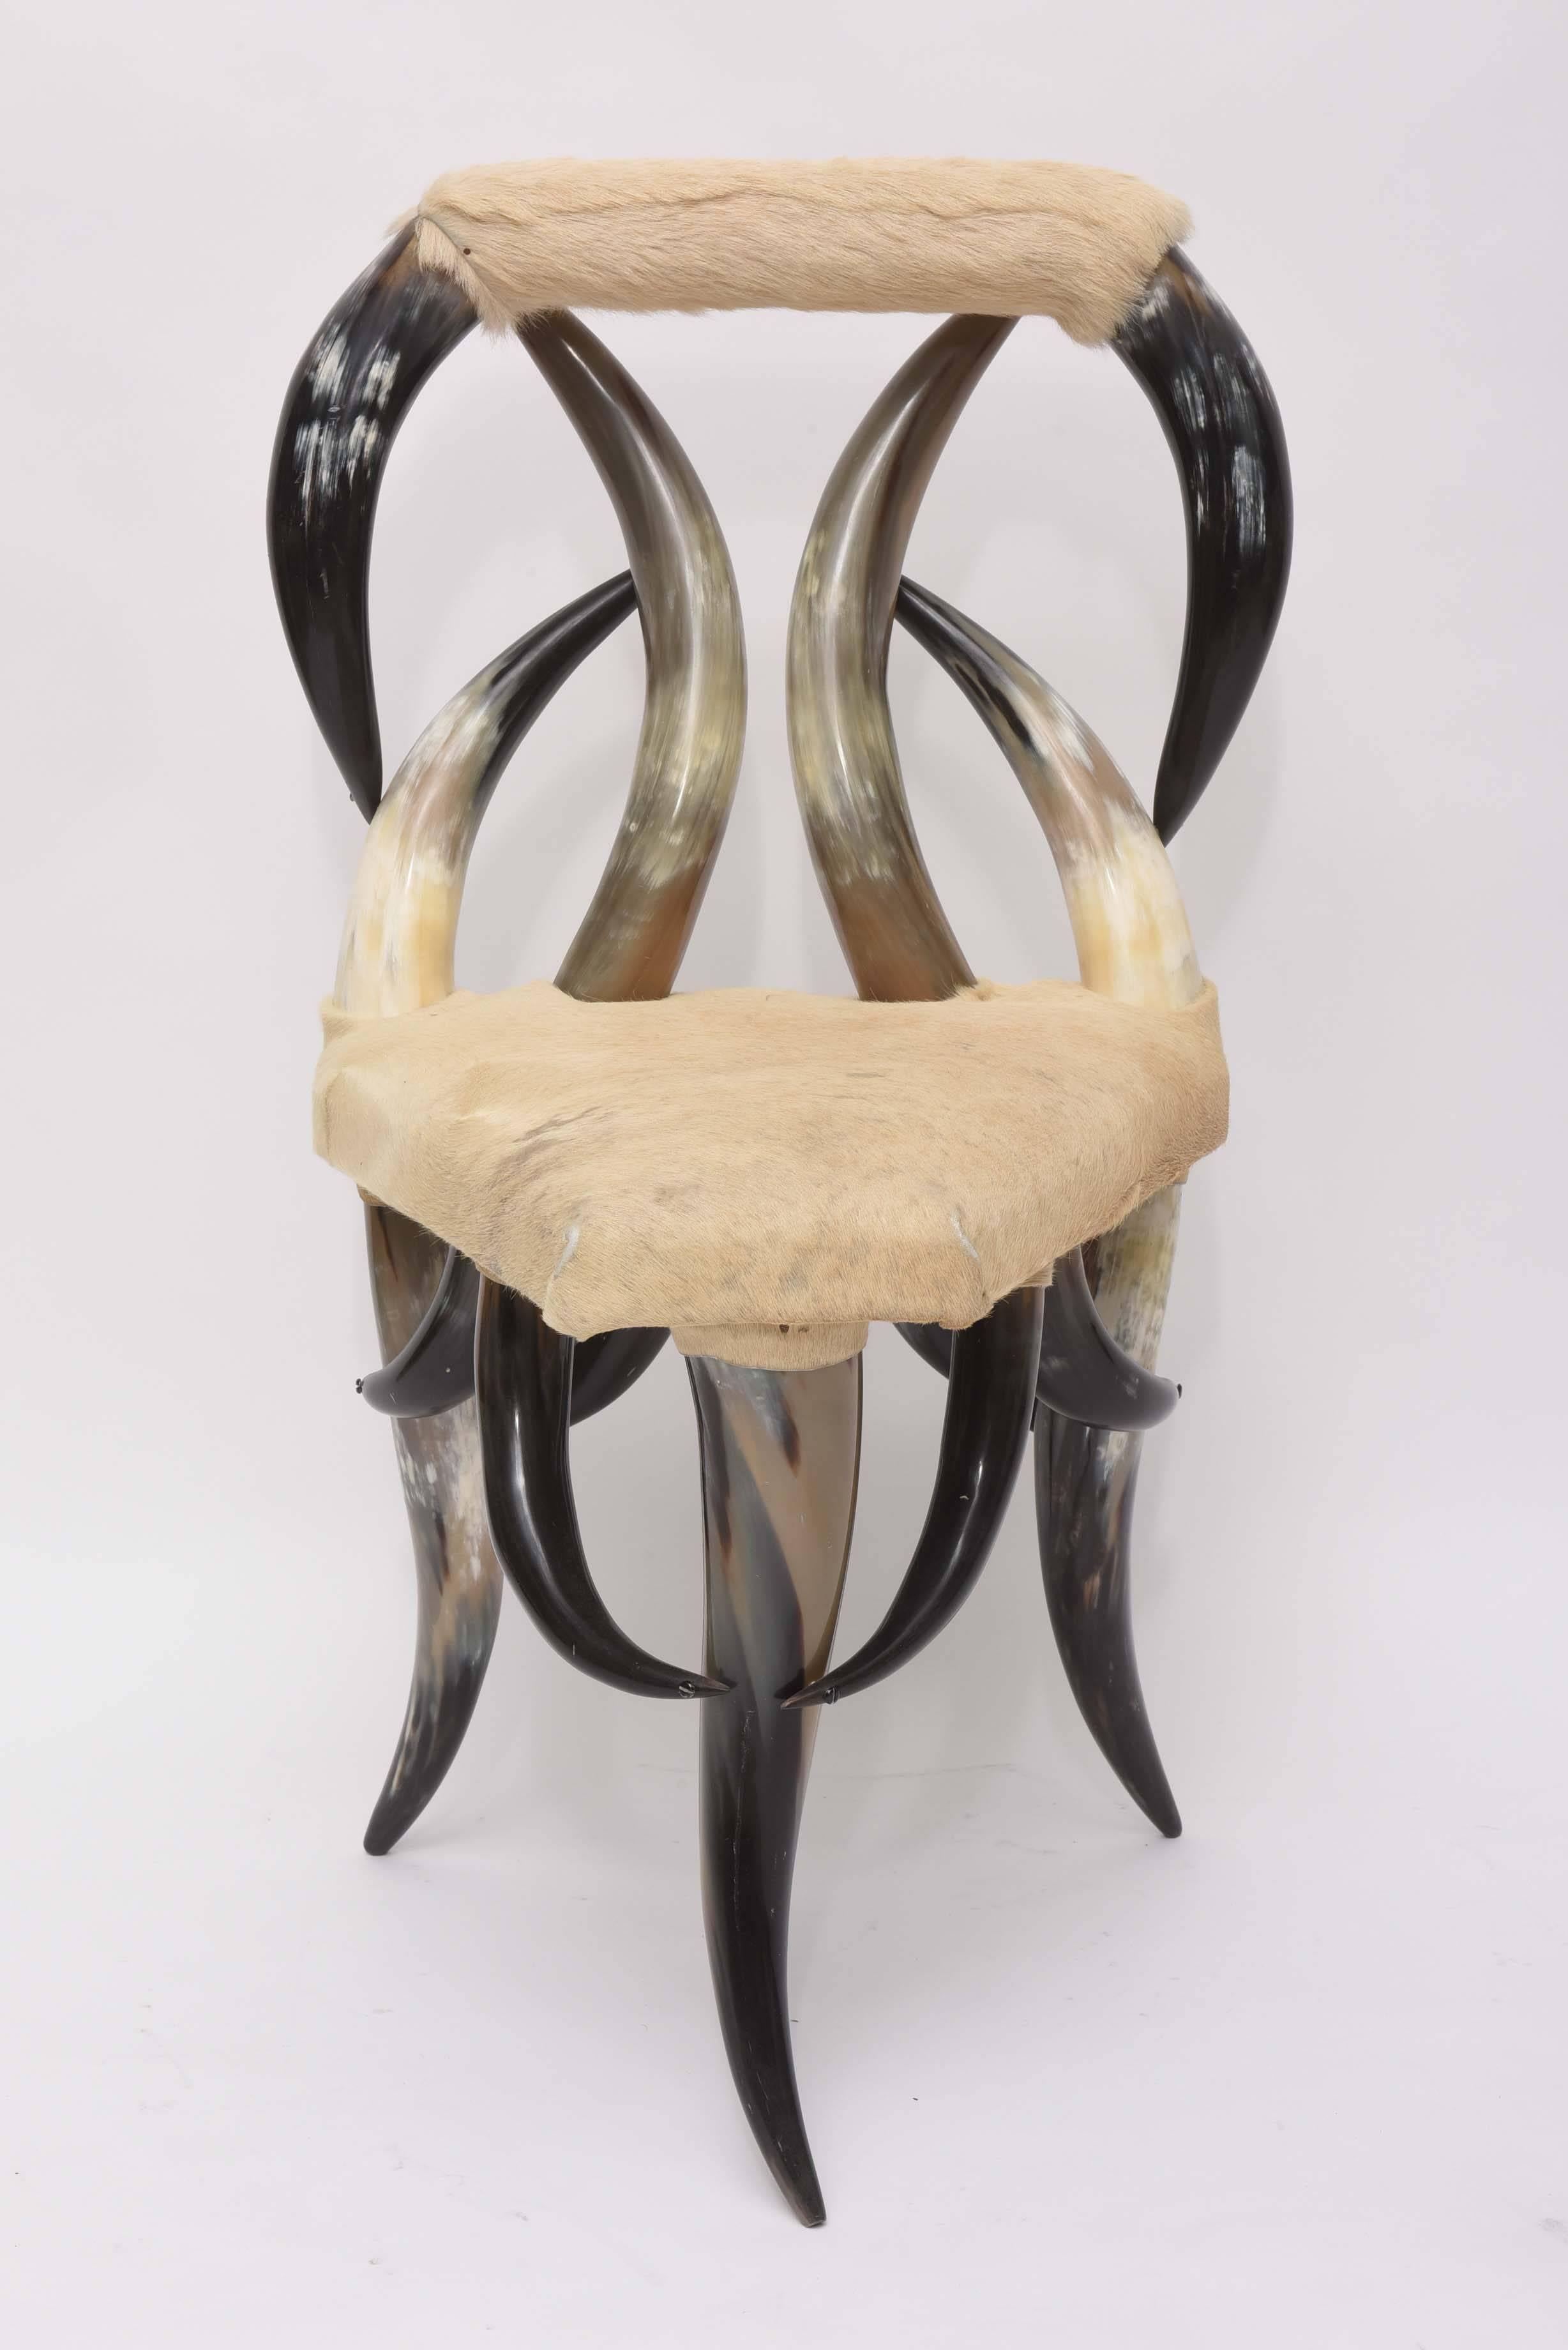 Vintage Horn chair with original buff cowhide upholstery.